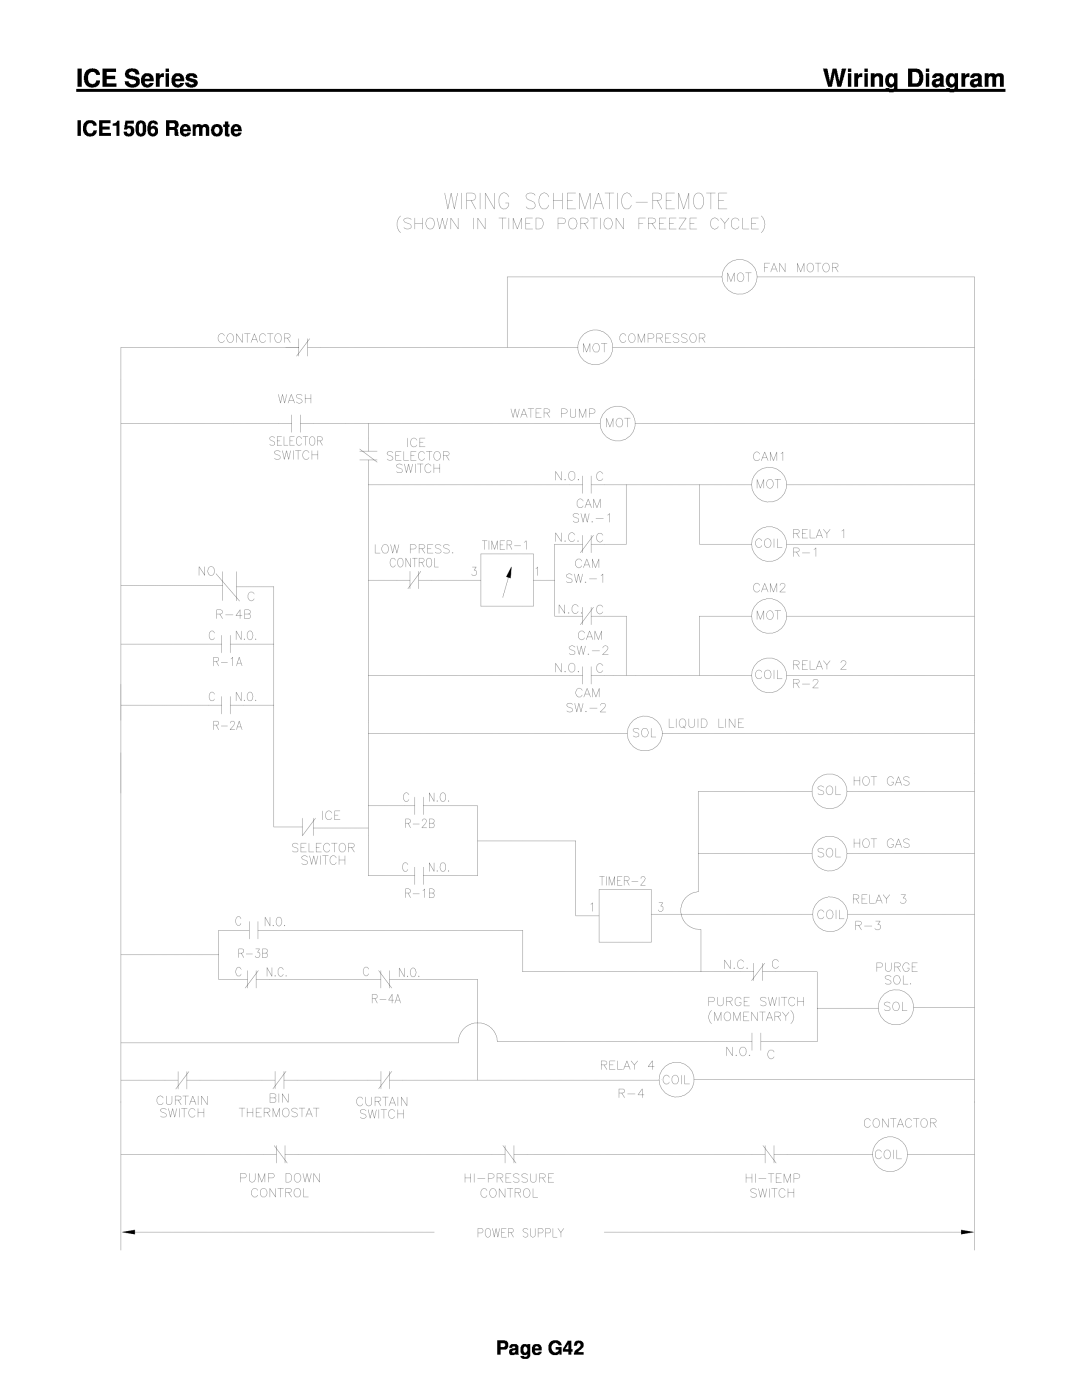 Ice-O-Matic ICE0250 Series installation manual ICE Series, Wiring Diagram, ICE1506 Remote, Page G42 